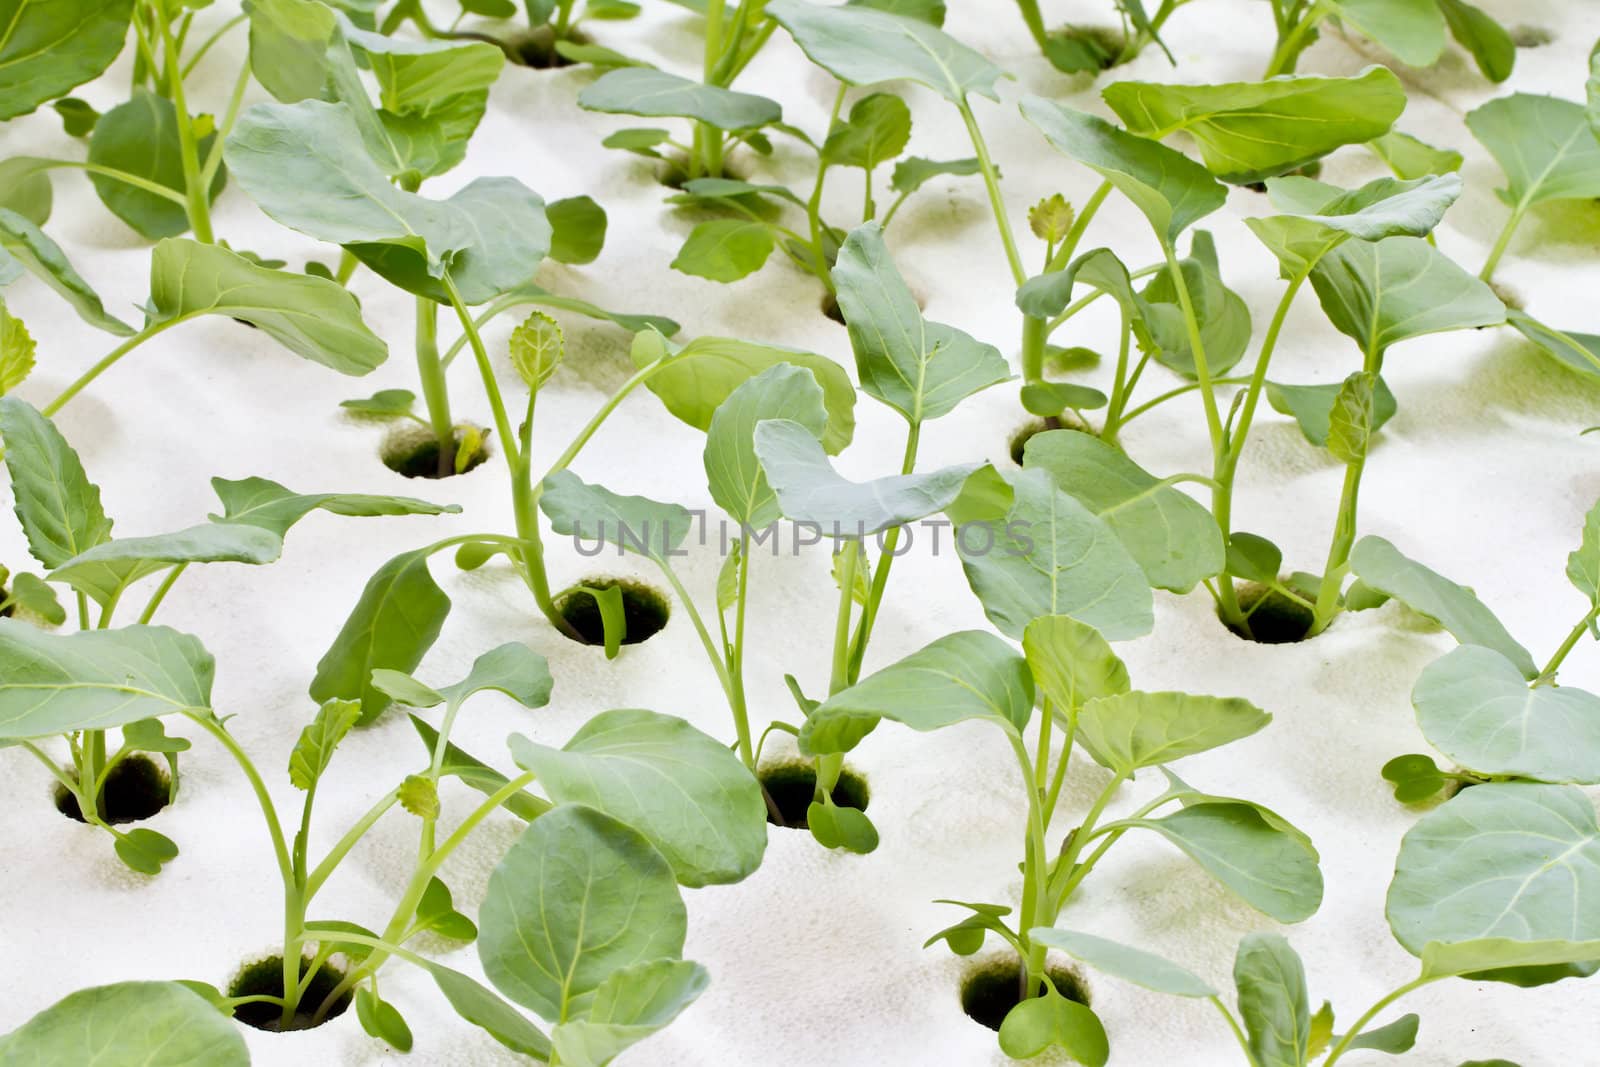 Hydroponics Vegetable, the future nutrition